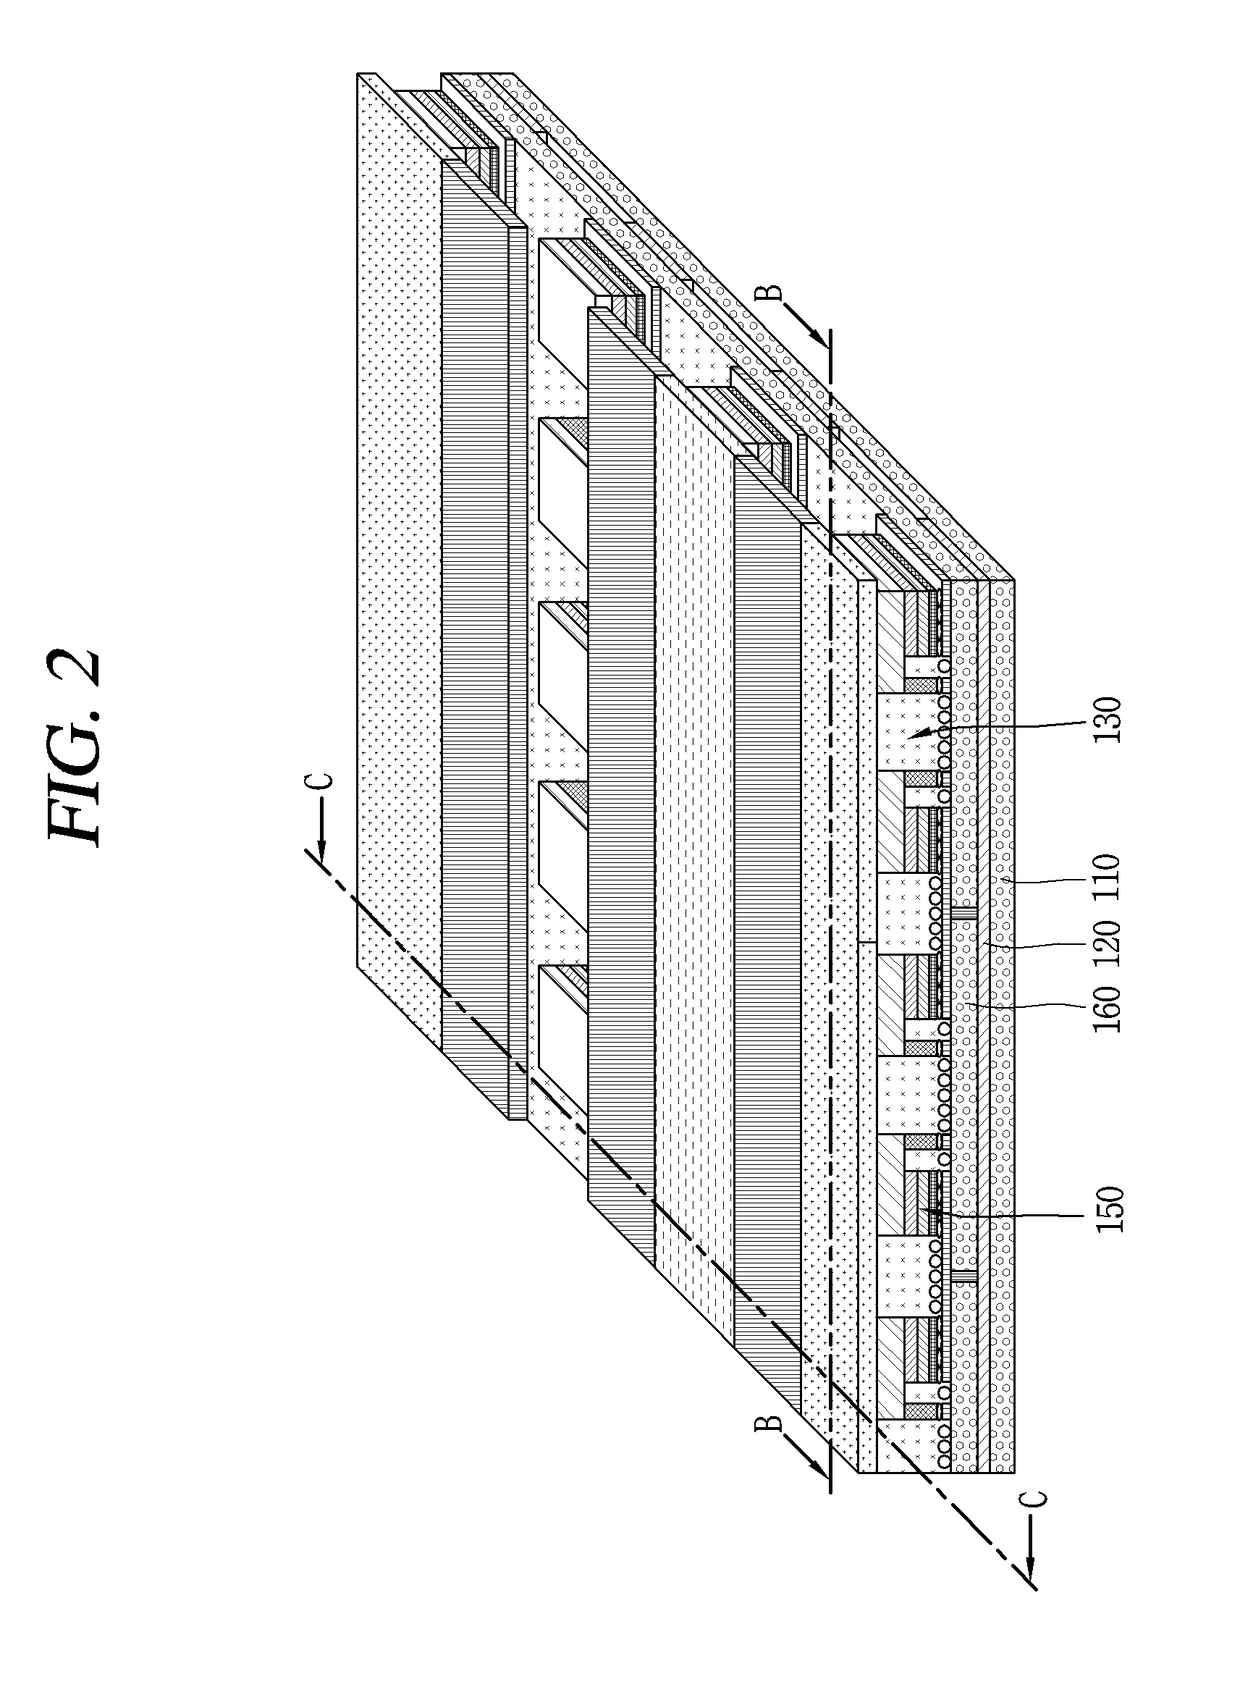 Display device using semiconductor light emitting diode